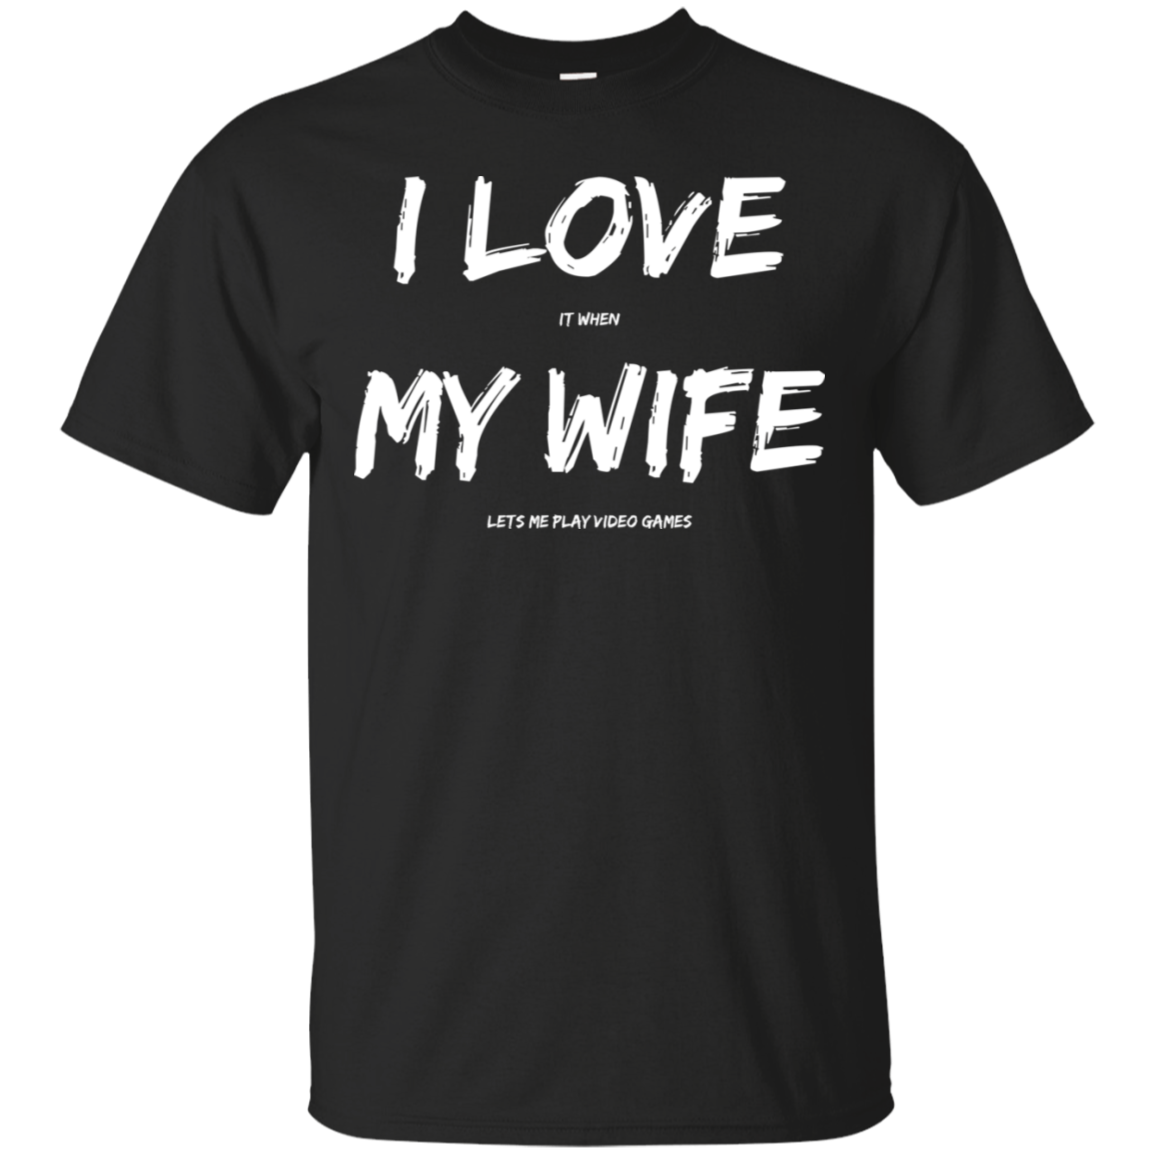 I Love It When My Wife Lets Me Play Video Games - Video Gaming Cotton T-Shirt